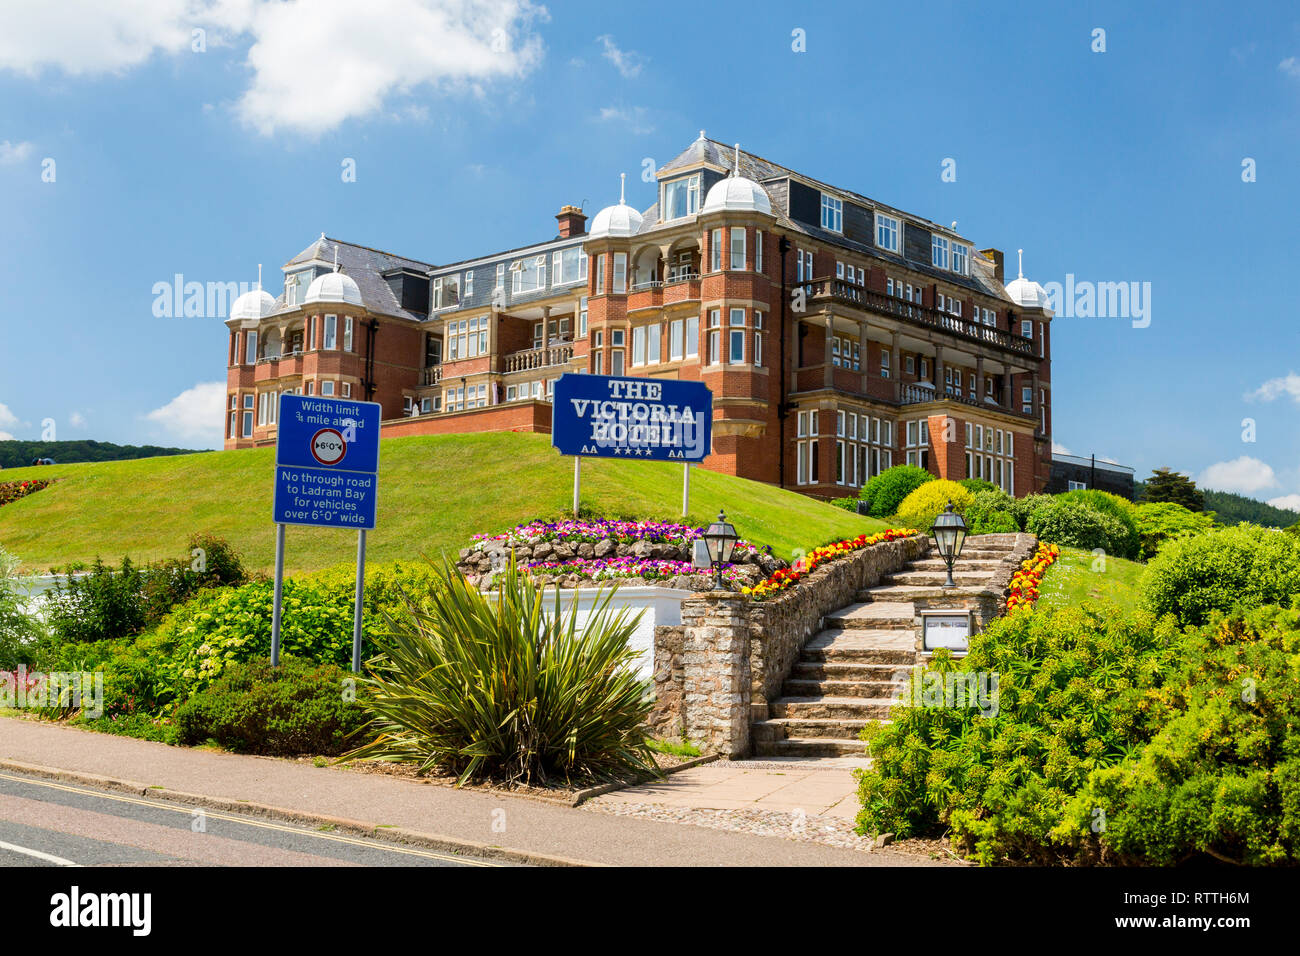 The imposing Victoria Hotel at Sidmouth on the Jurassic Coast, Devon, England, UK Stock Photo